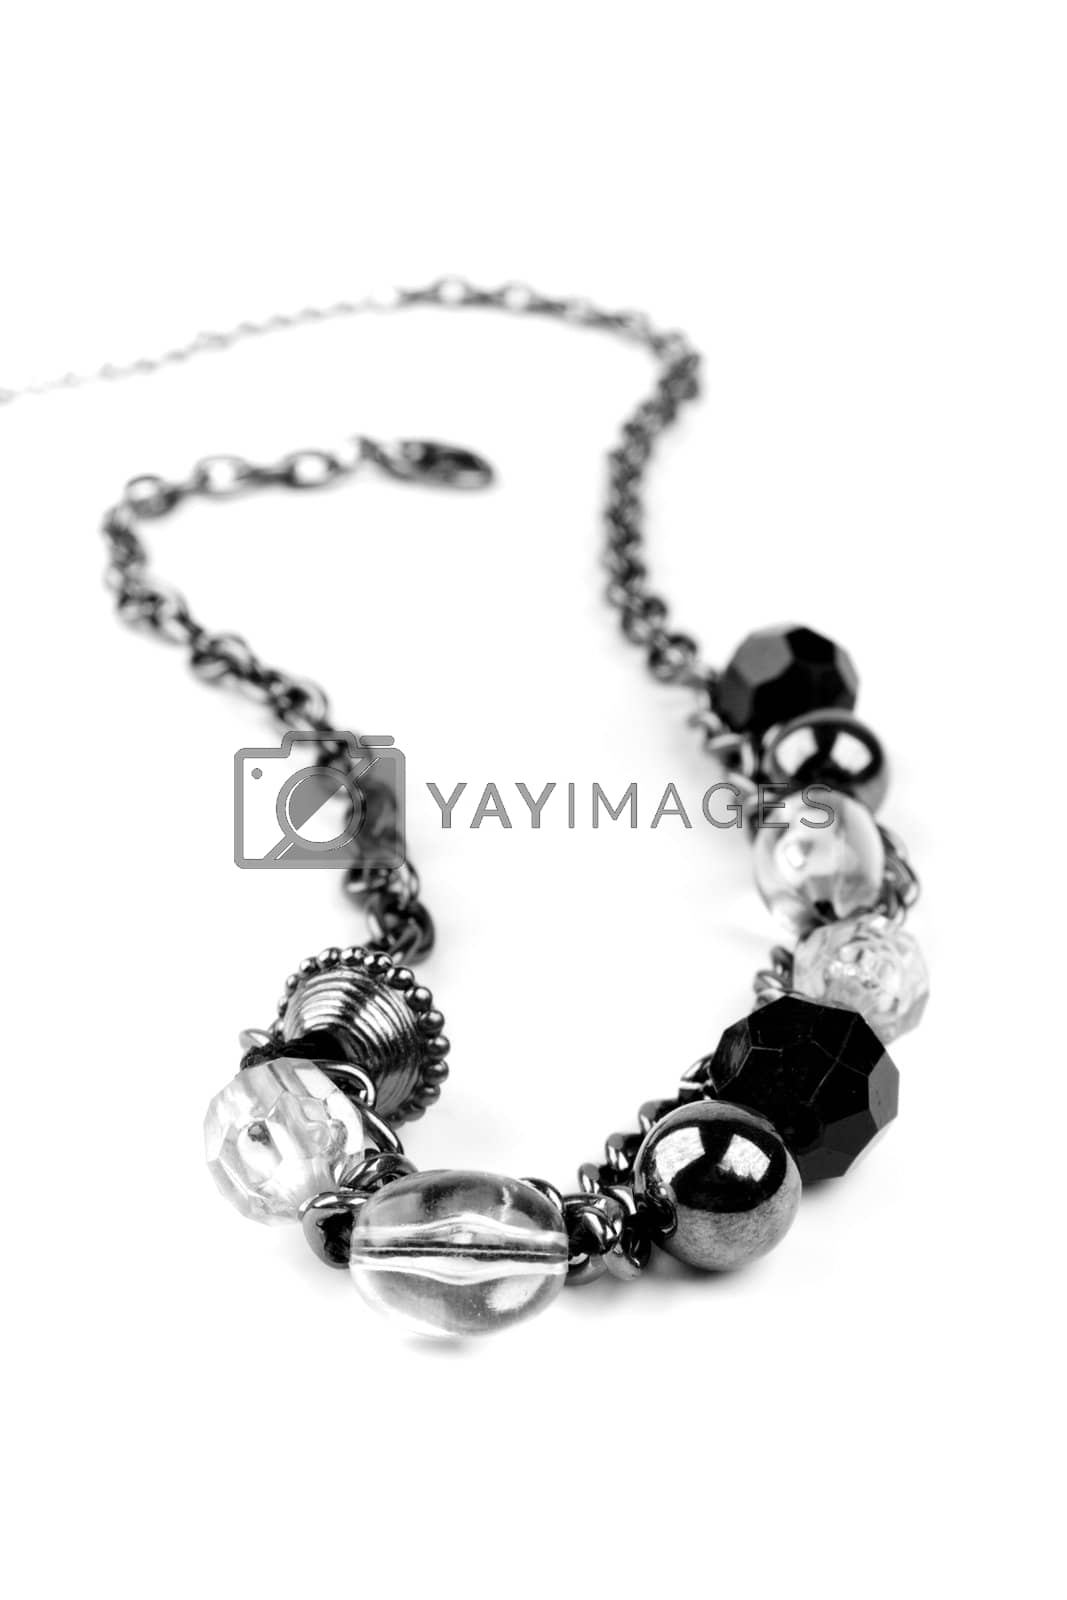 Royalty free image of necklace by marylooo